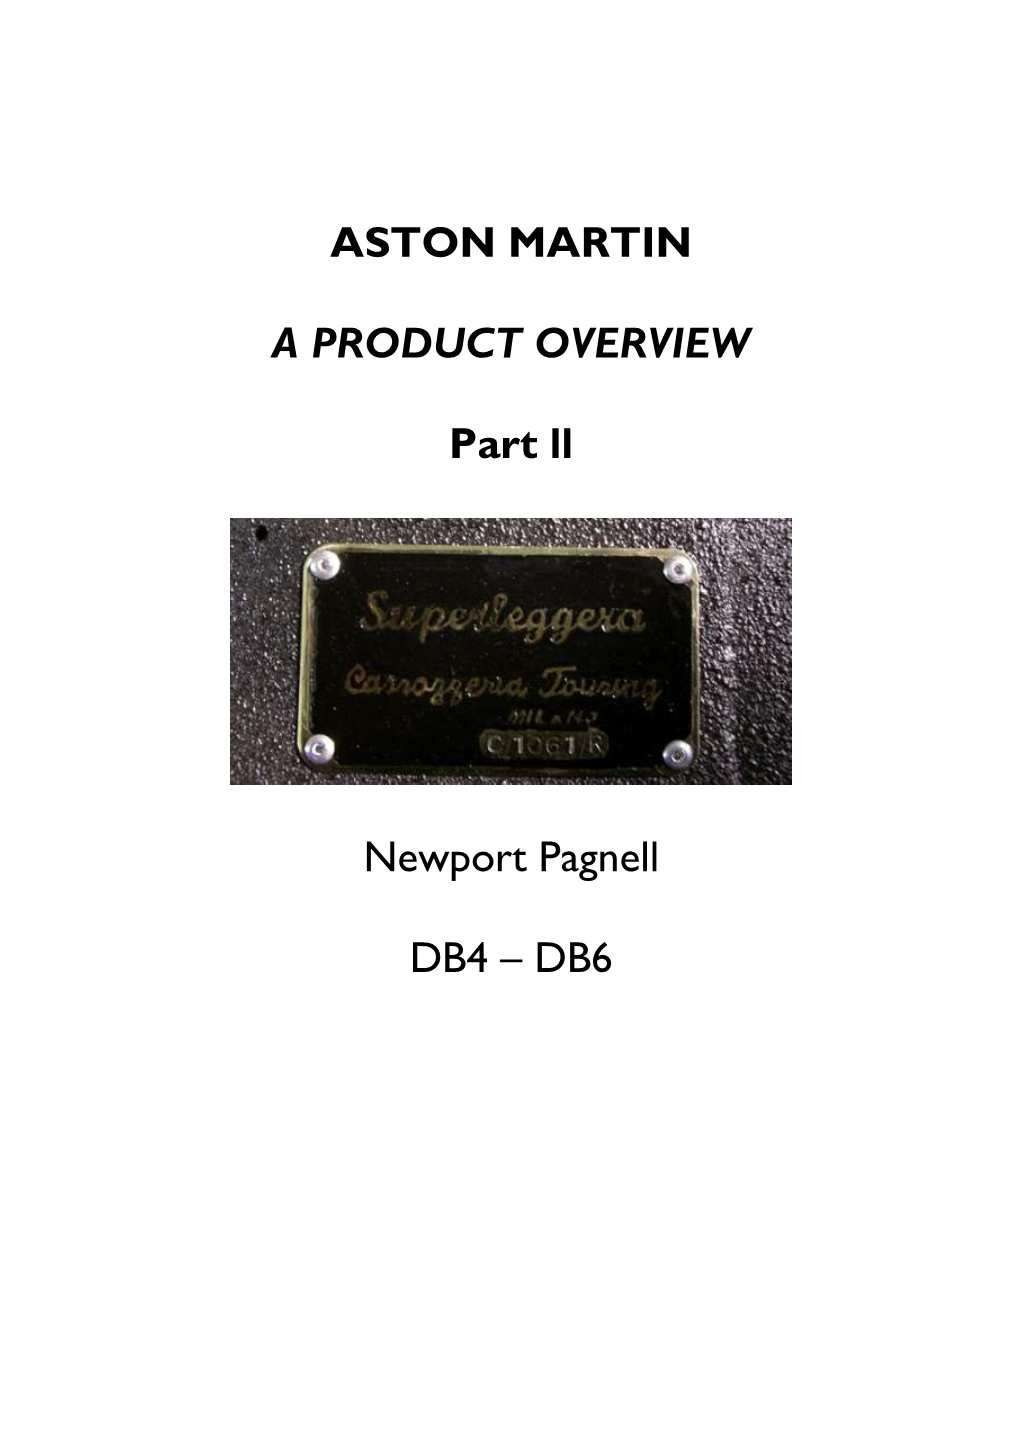 Aston Martin Product Overview Part II